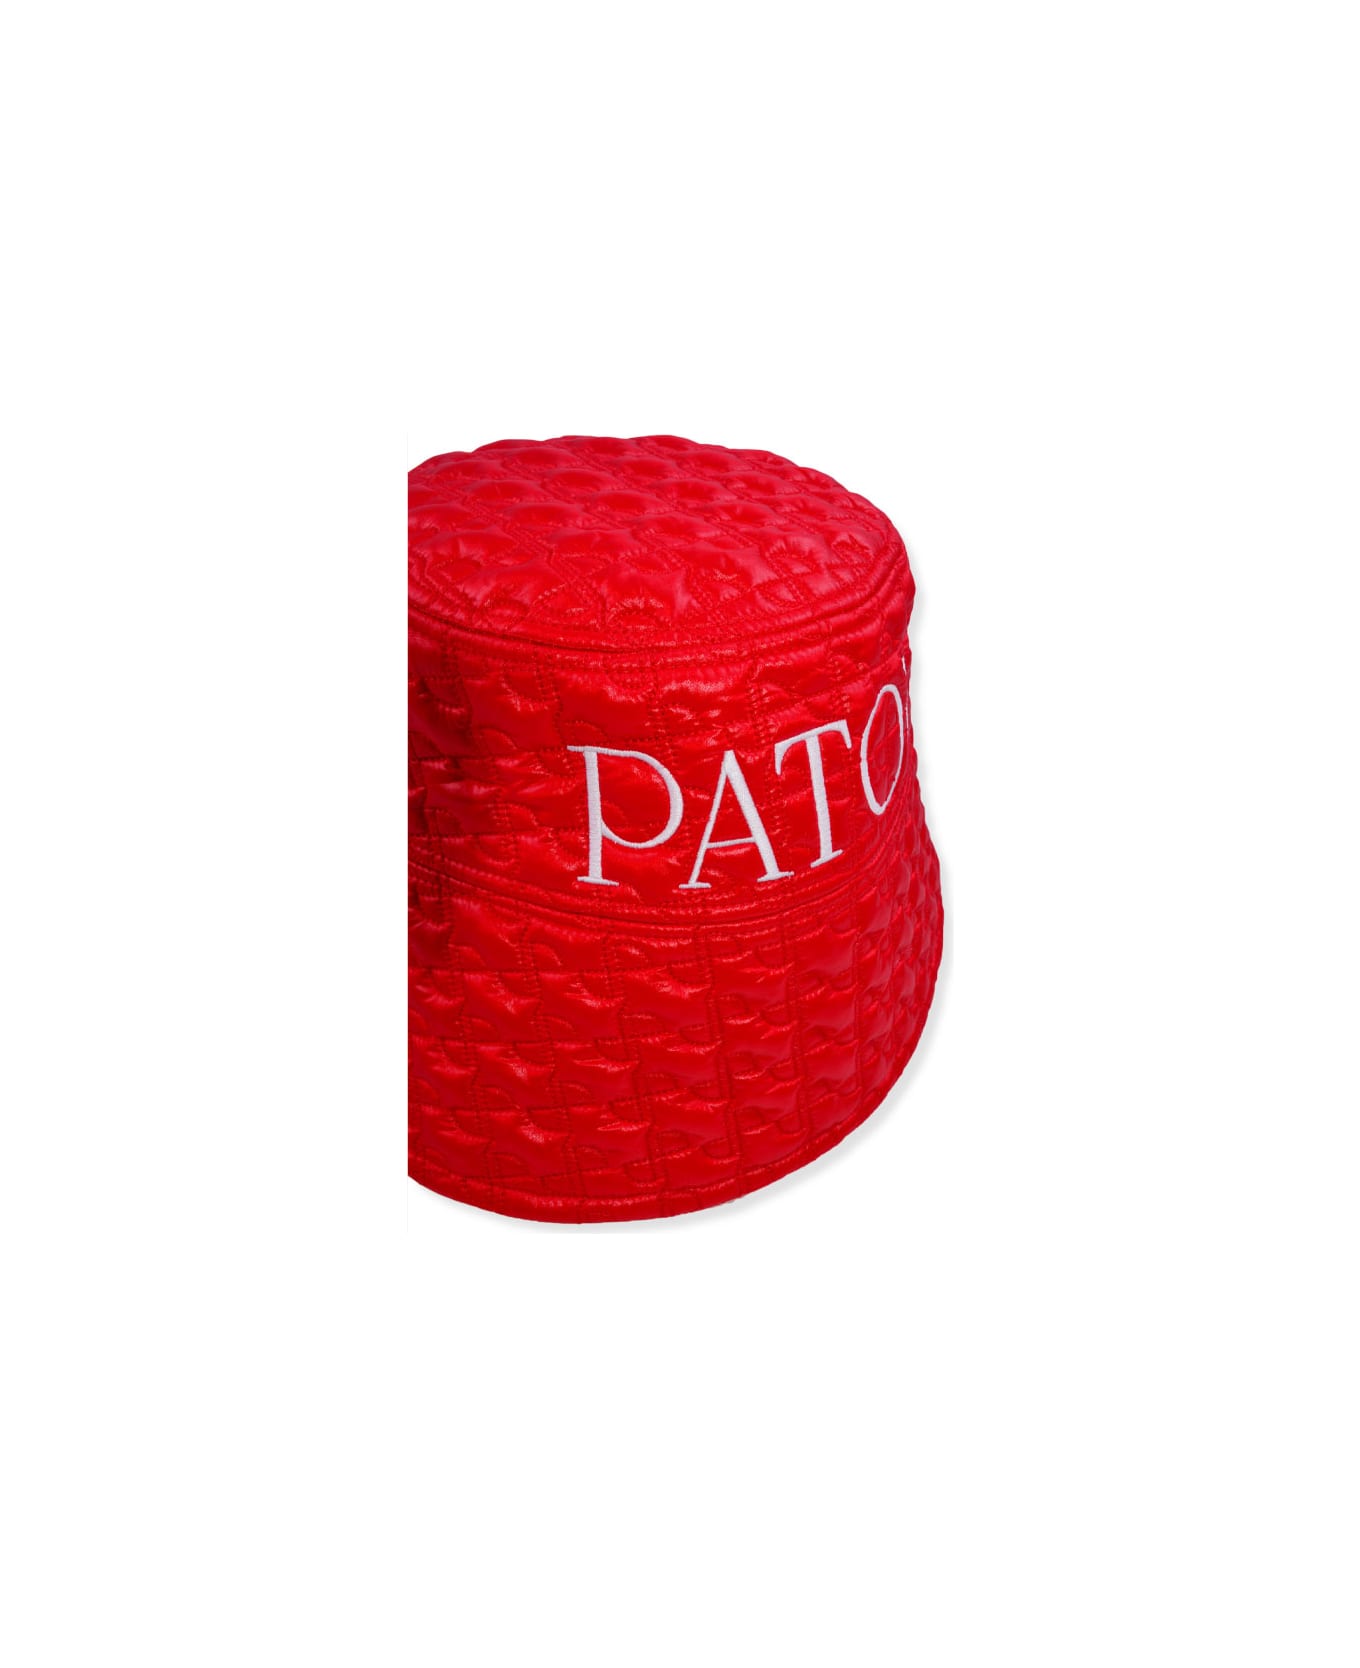 Patou Hat - Red